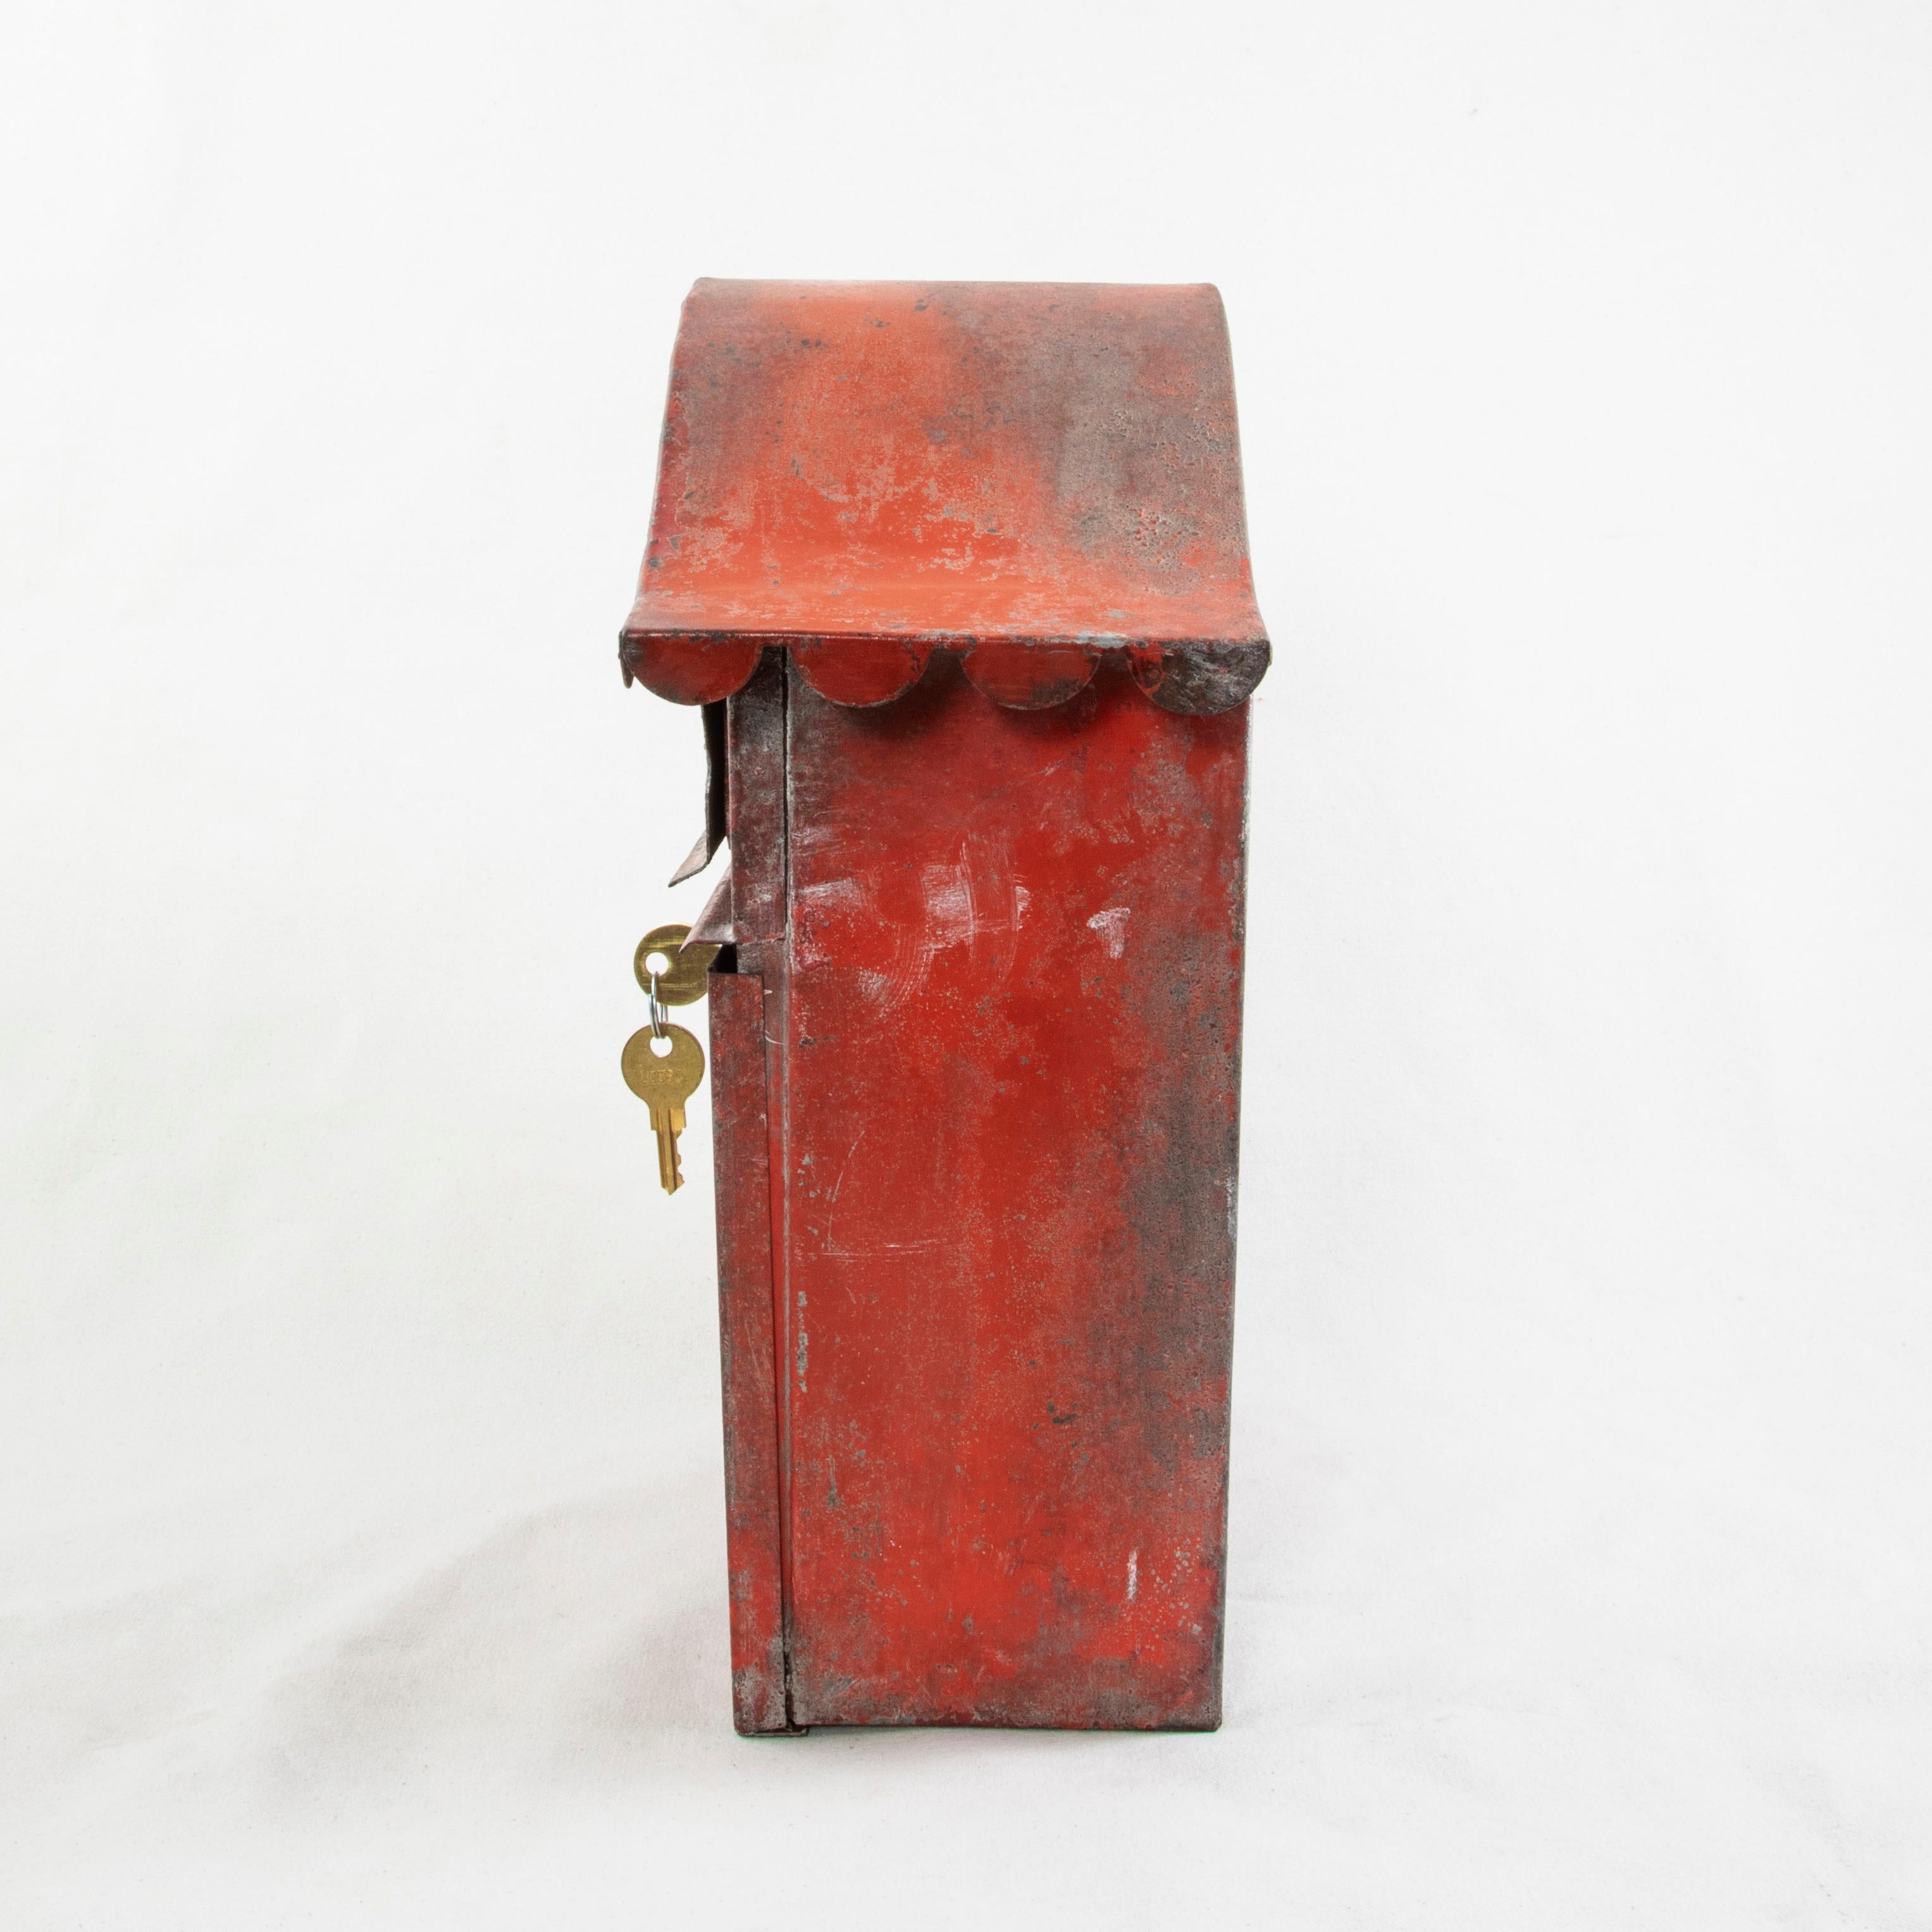 Painted Mid-20th Century French Red Metal Mailbox with Lock and Key